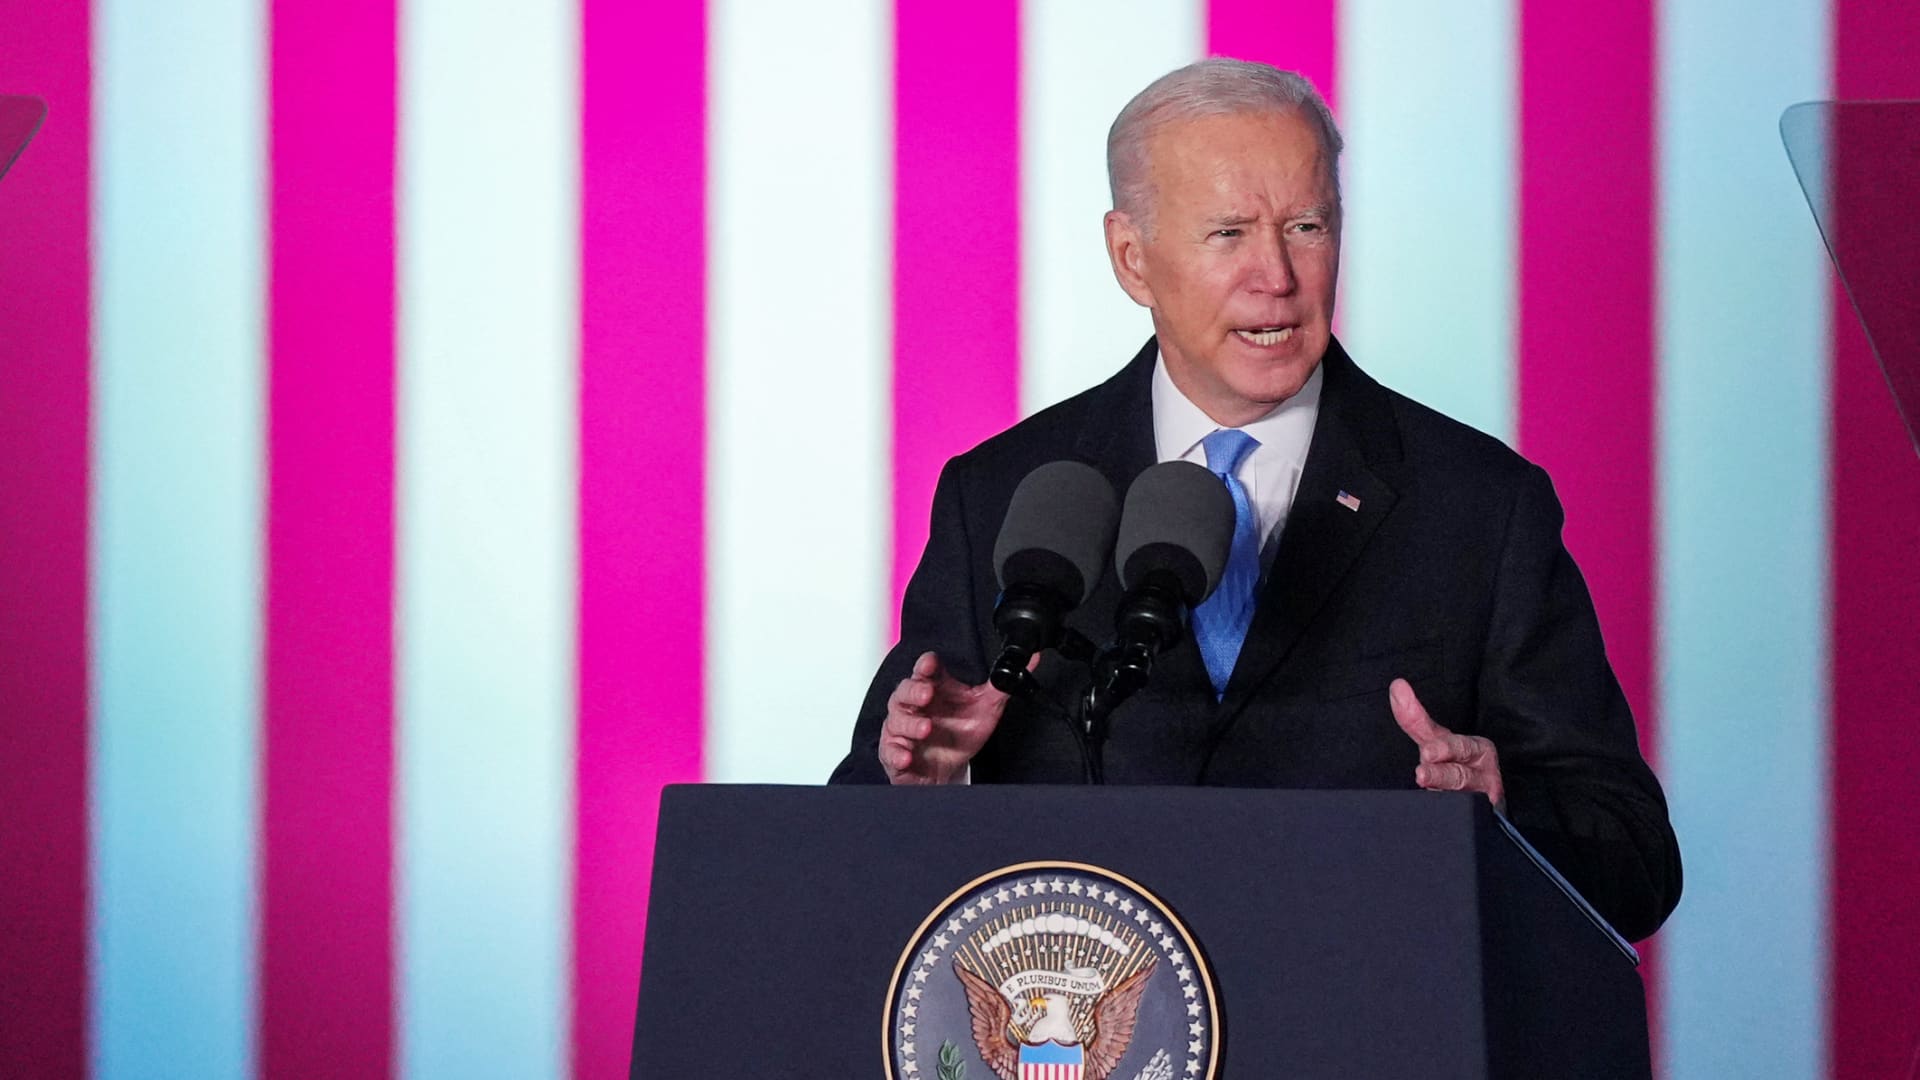 U.S. President Joe Biden speaks during an event at the Royal Castle, amid Russia's invasion of Ukraine, in Warsaw, Poland, March 26, 2022.